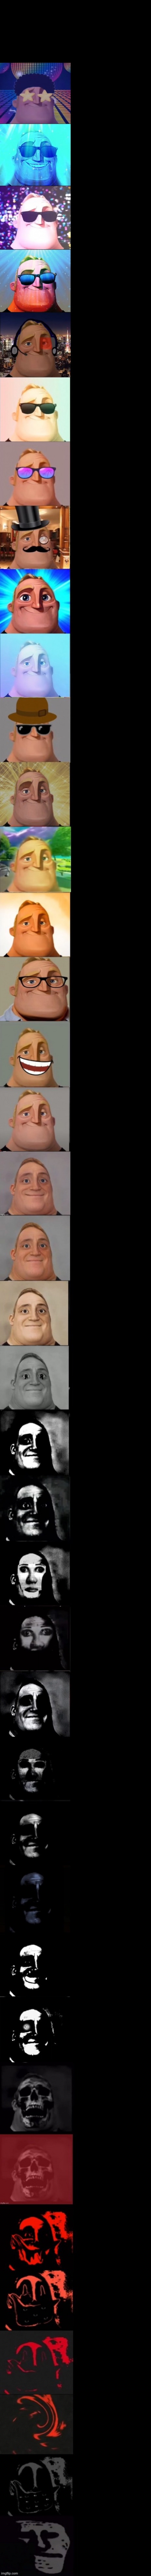 Mr Incredible Becoming Uncanny Super Extended HD Blank Meme Template